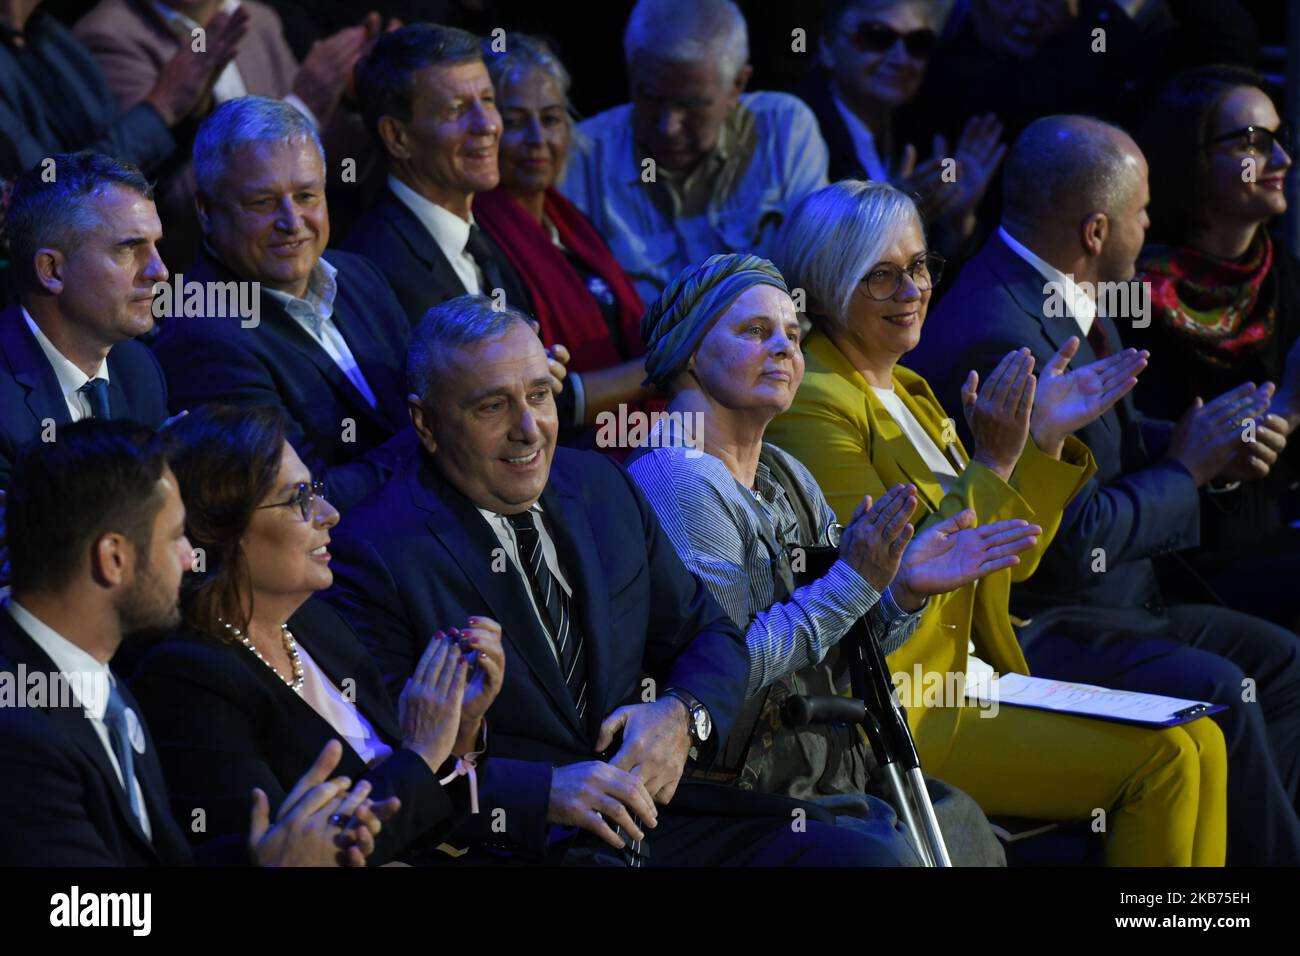 Grzegorz Schetyna, Leader of Civic Platform and Malgorzata Kidawa-Blonska, a candidate from the Civic Platform list and Deputy Marshal of the Polish Sejm, surrounded by a party members during the Civic Coalition election campaign convention in Krakow, ahead of the 2019 Polish parliamentary election on Sunday, October 13, 2019. On Saturday, September 28, 2019, in Krakow, Poland. (Photo by Artur Widak/NurPhoto) Stock Photo